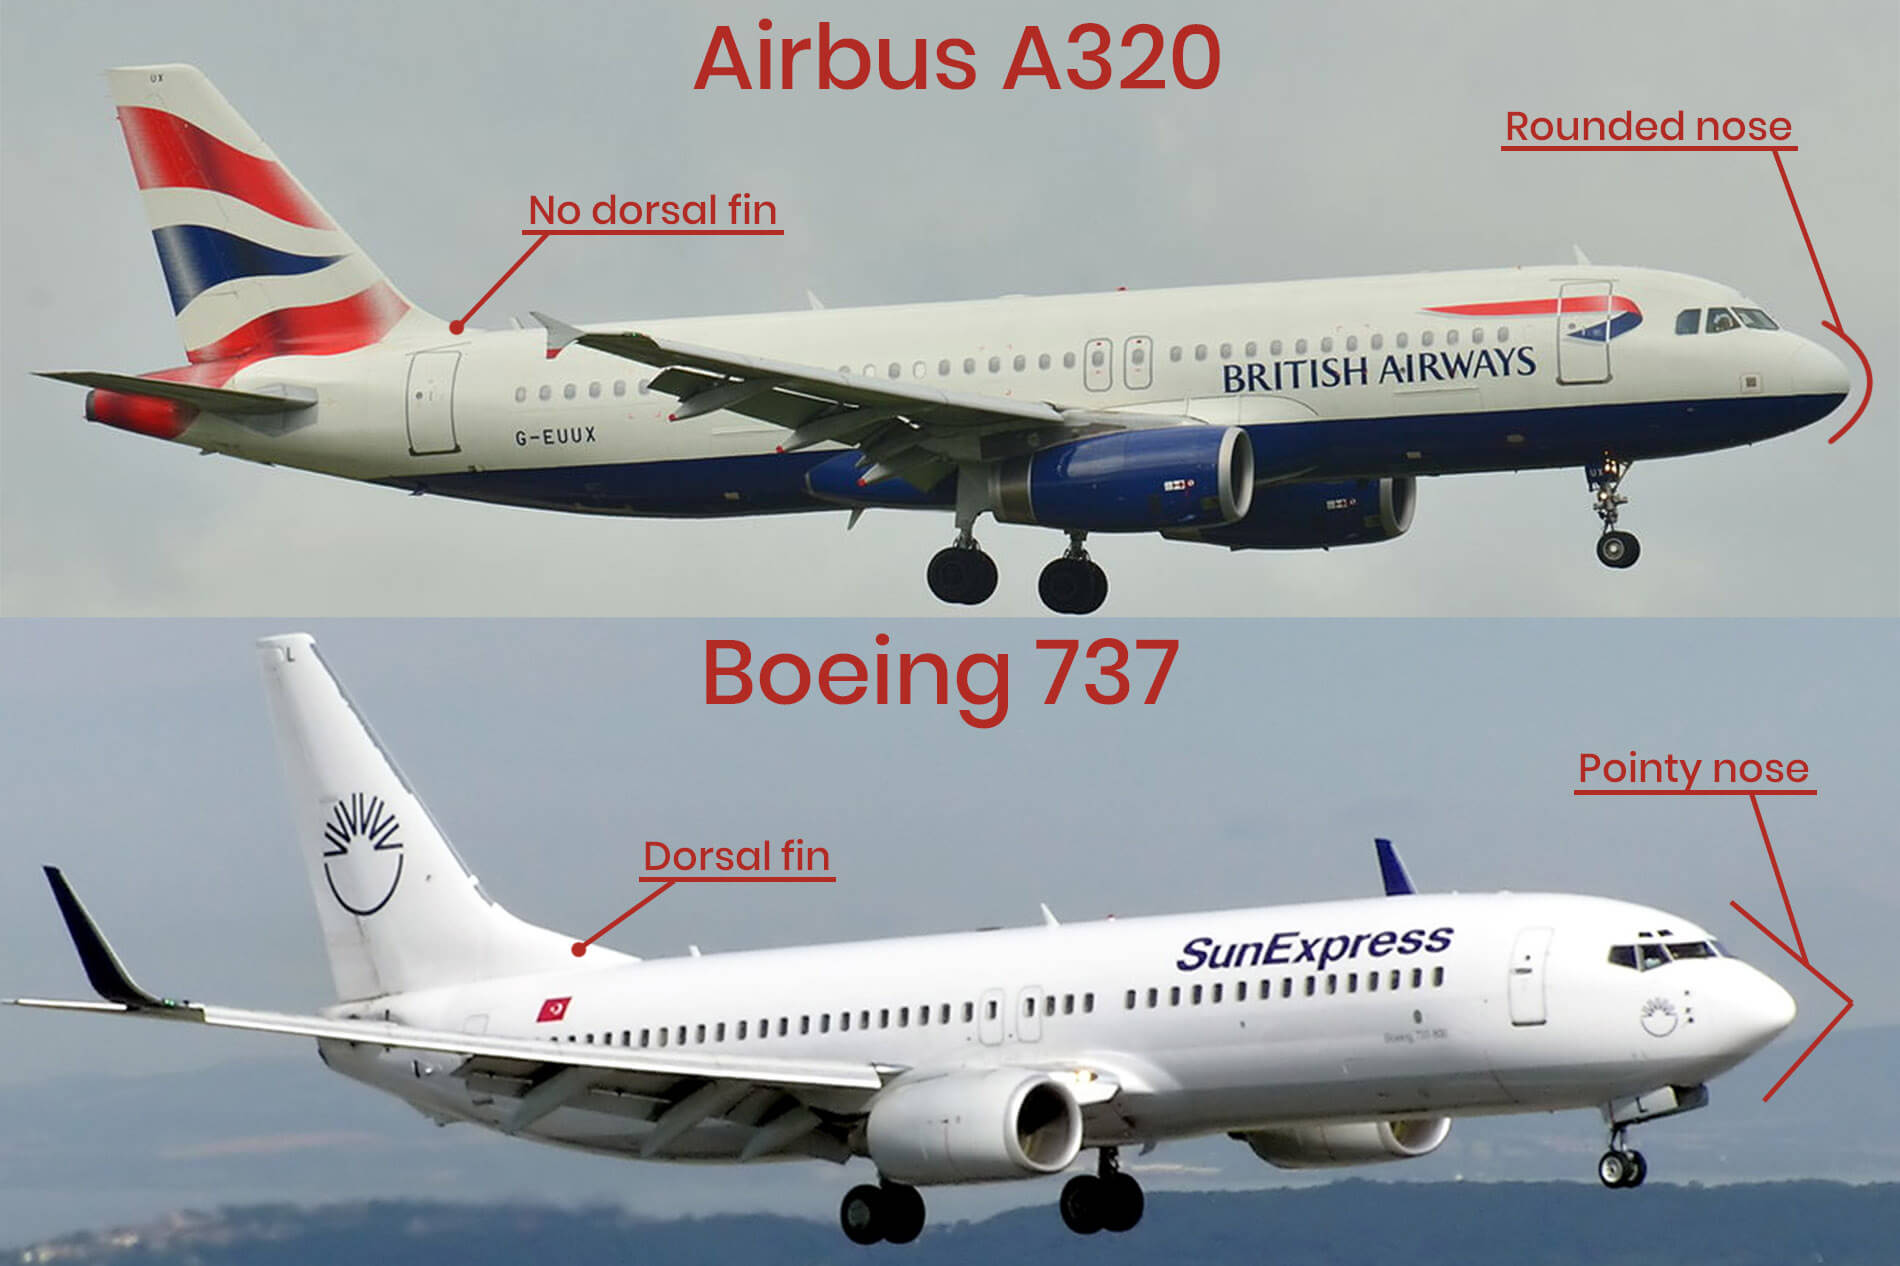 Airbus A320 Boeing 737 spotting guide